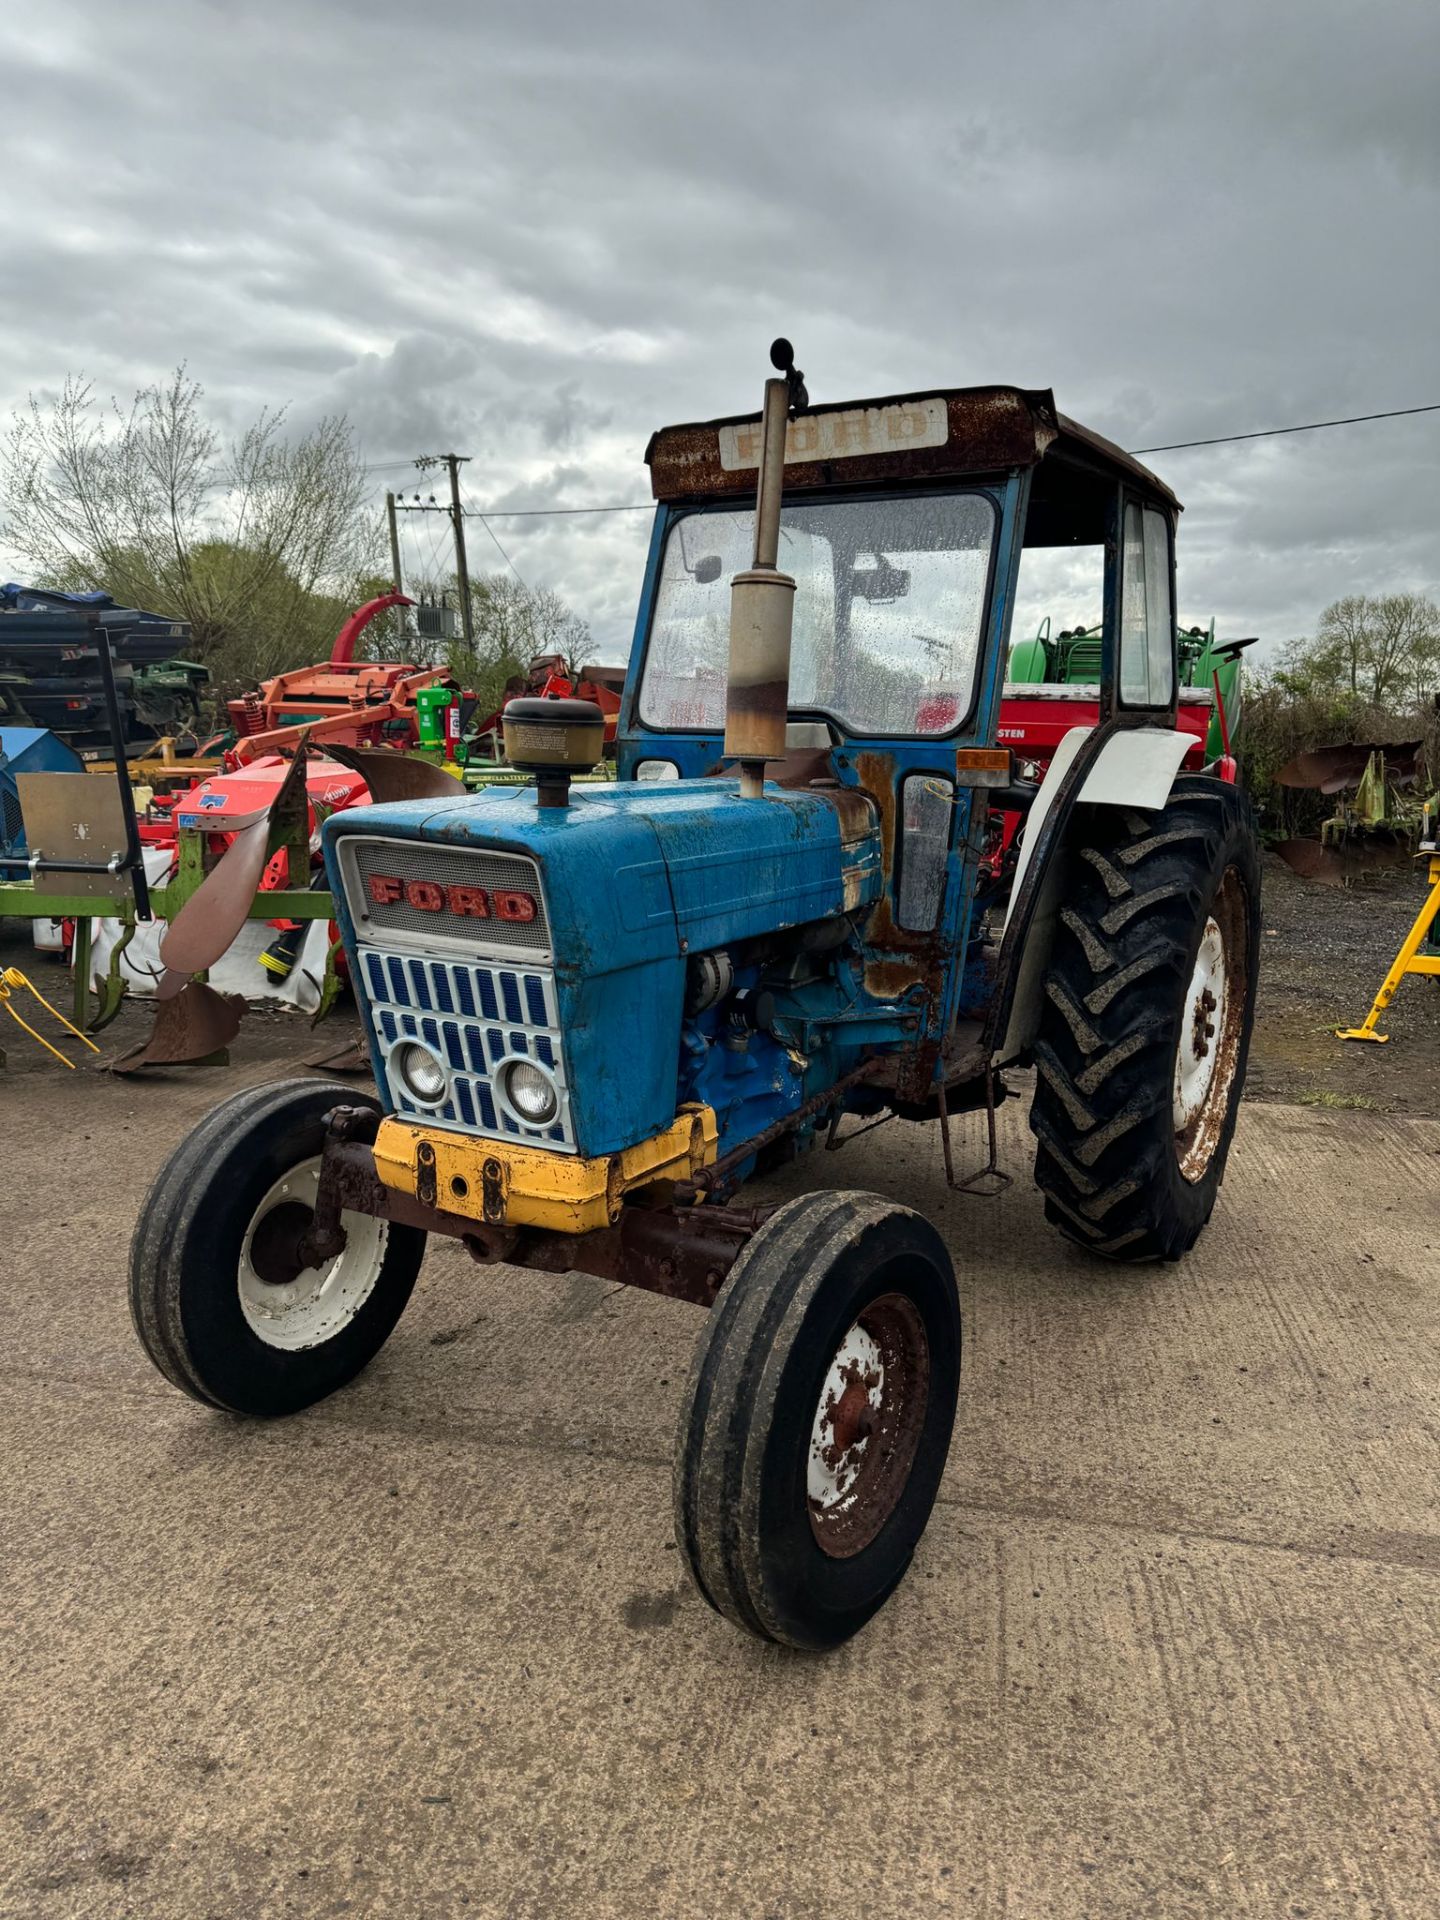 RELIABLE WORKHORSE: FORD 4000 TRACTOR